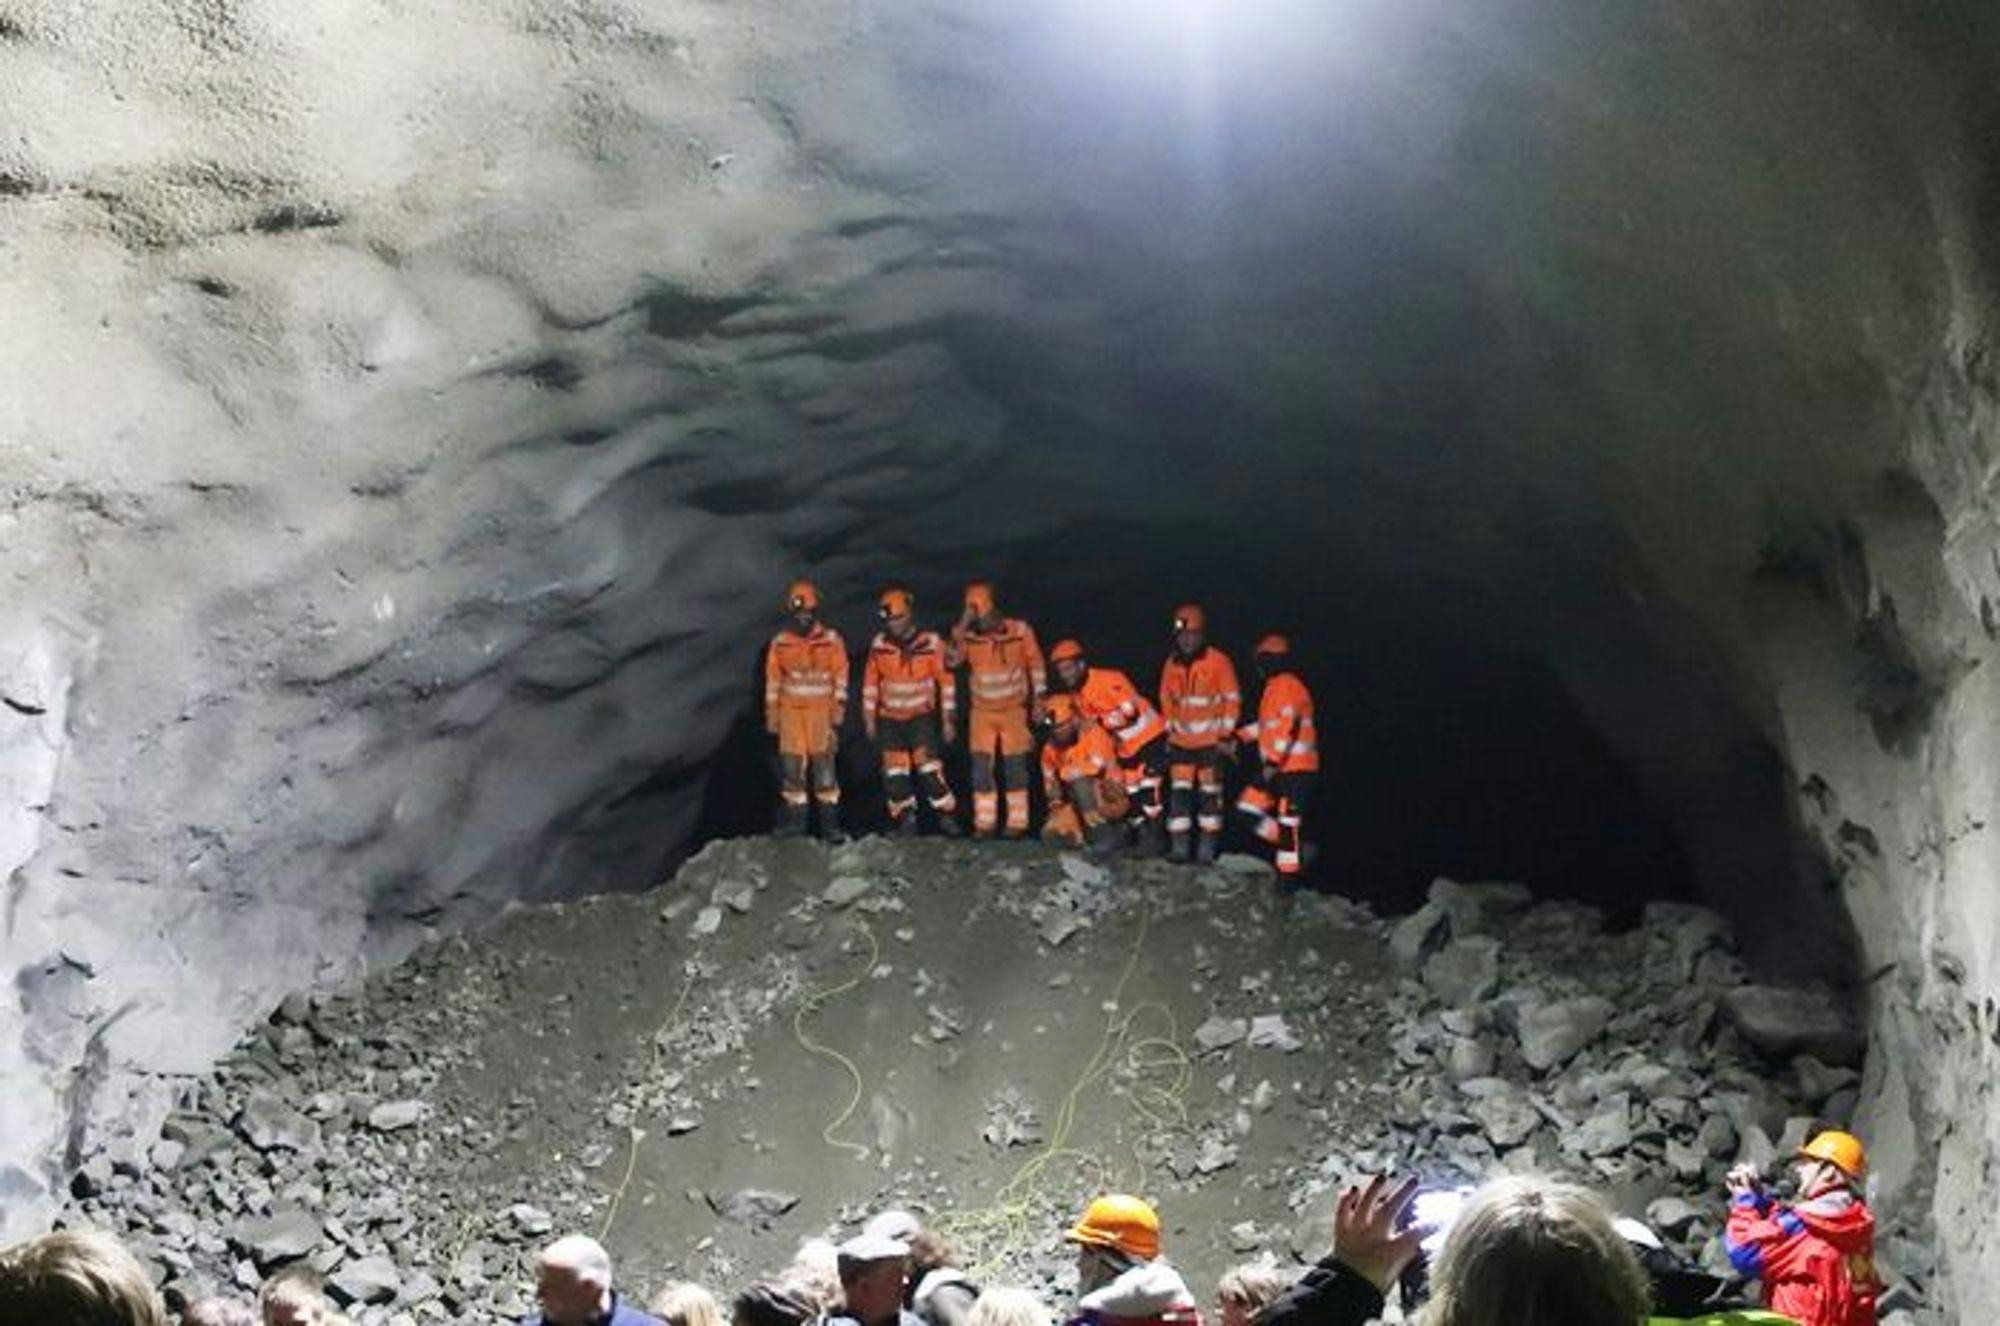 A work crew gathered in a large rocky cave or tunnel entrance